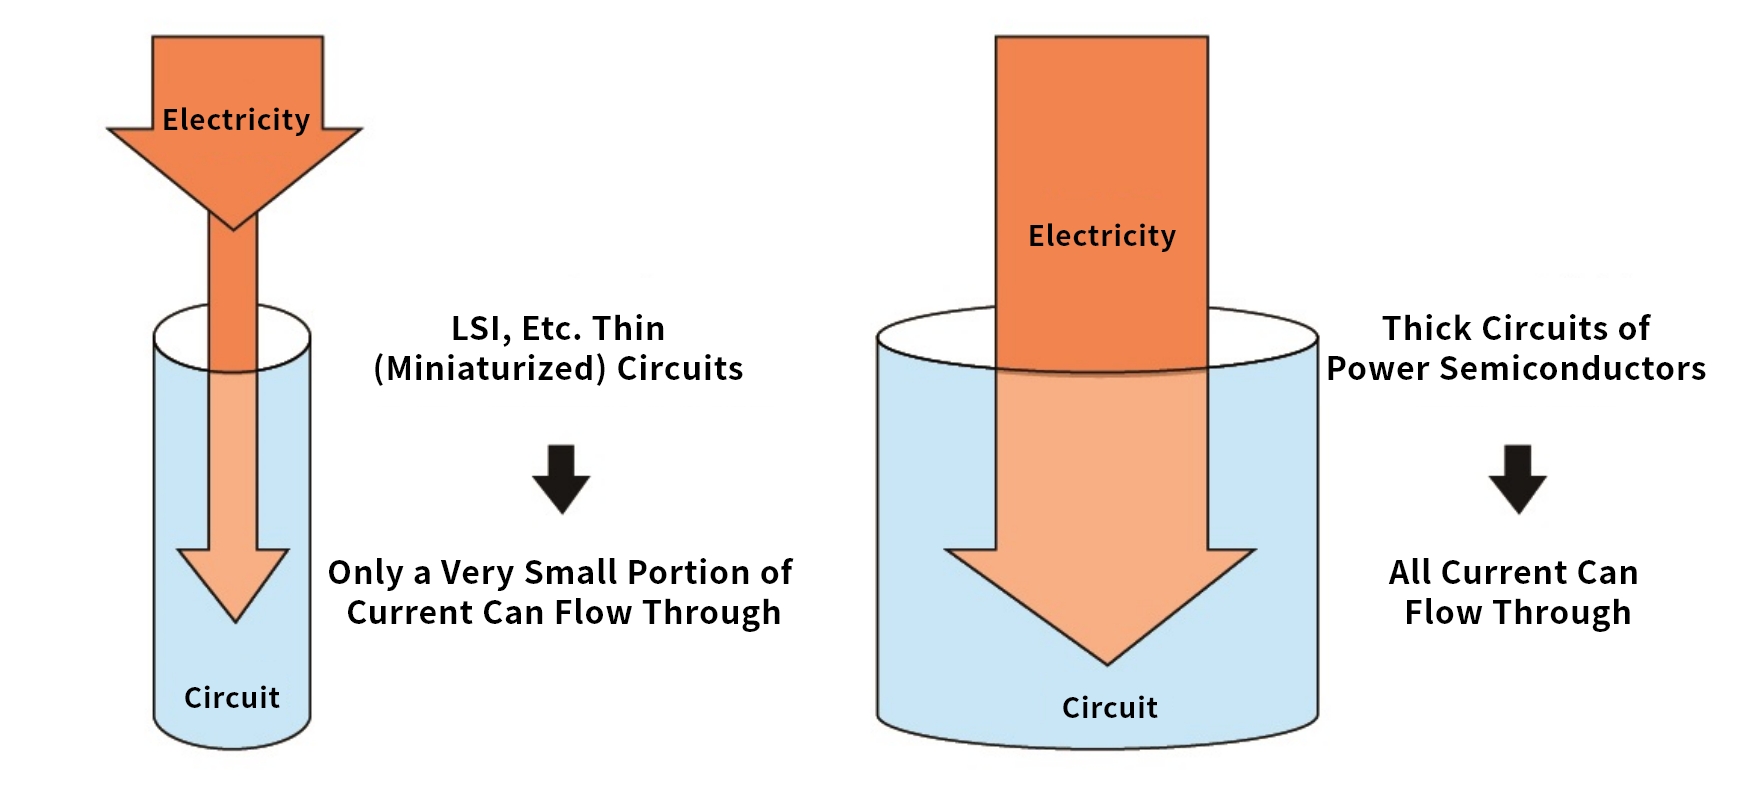 Fig. 3 - Power Semiconductors Require Large Circuit Widths